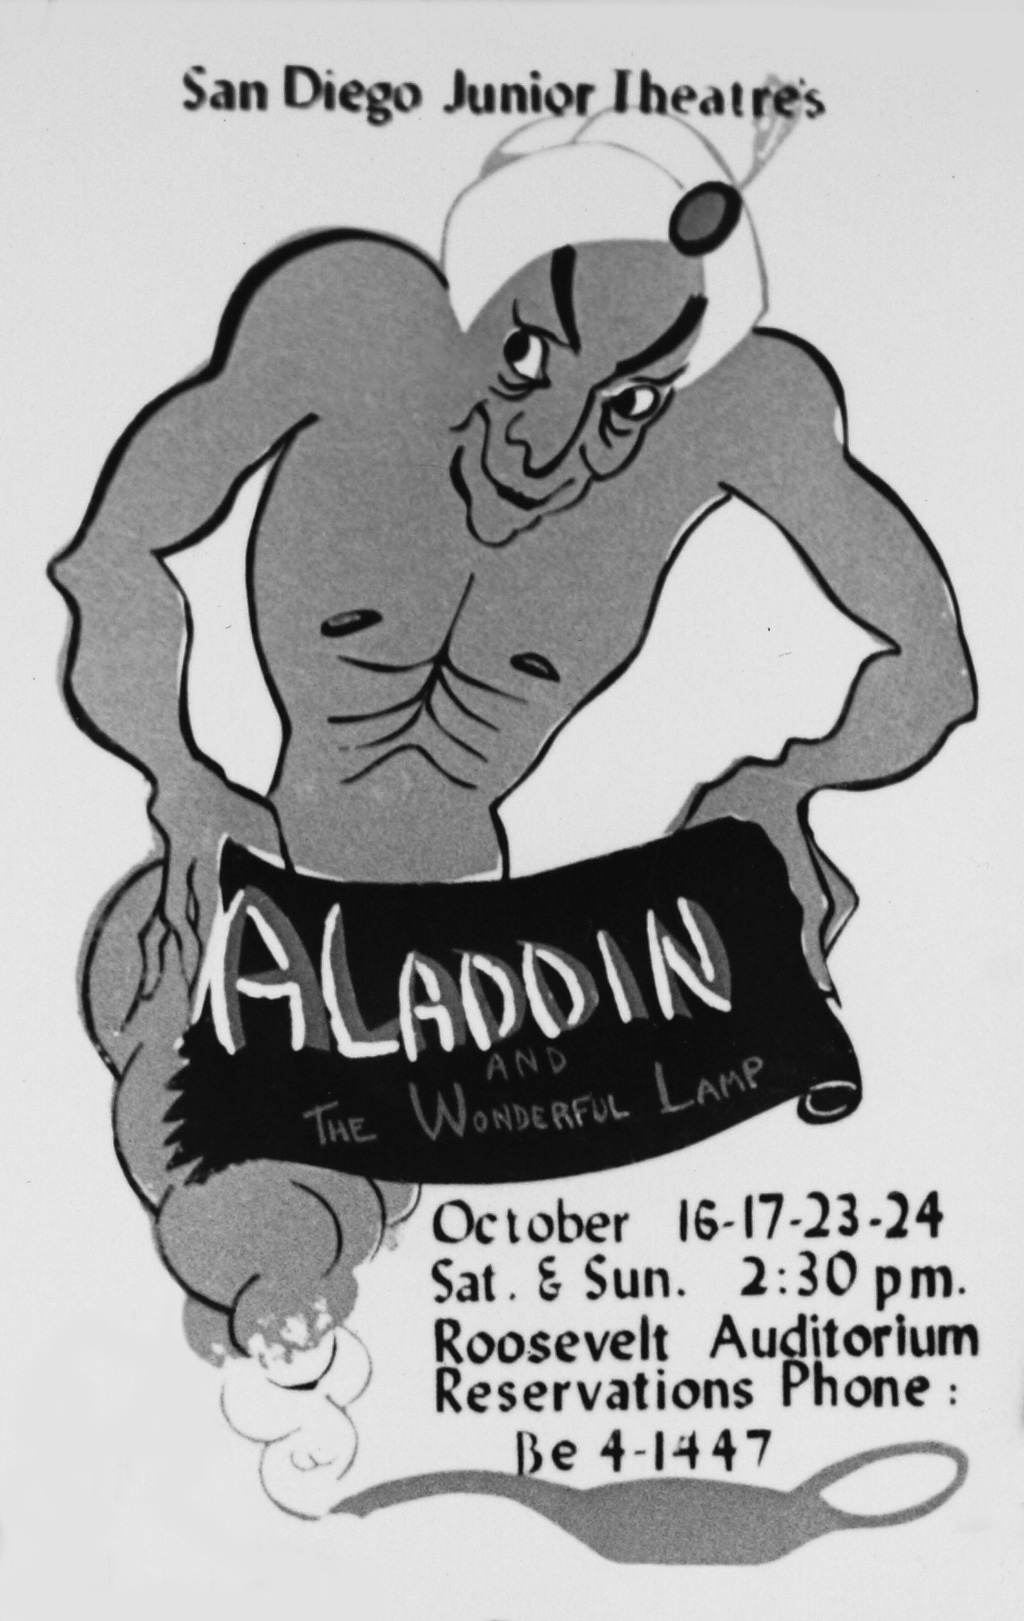 A rare poster for San Diego Junior Theatre's 1954 production of Aladdin